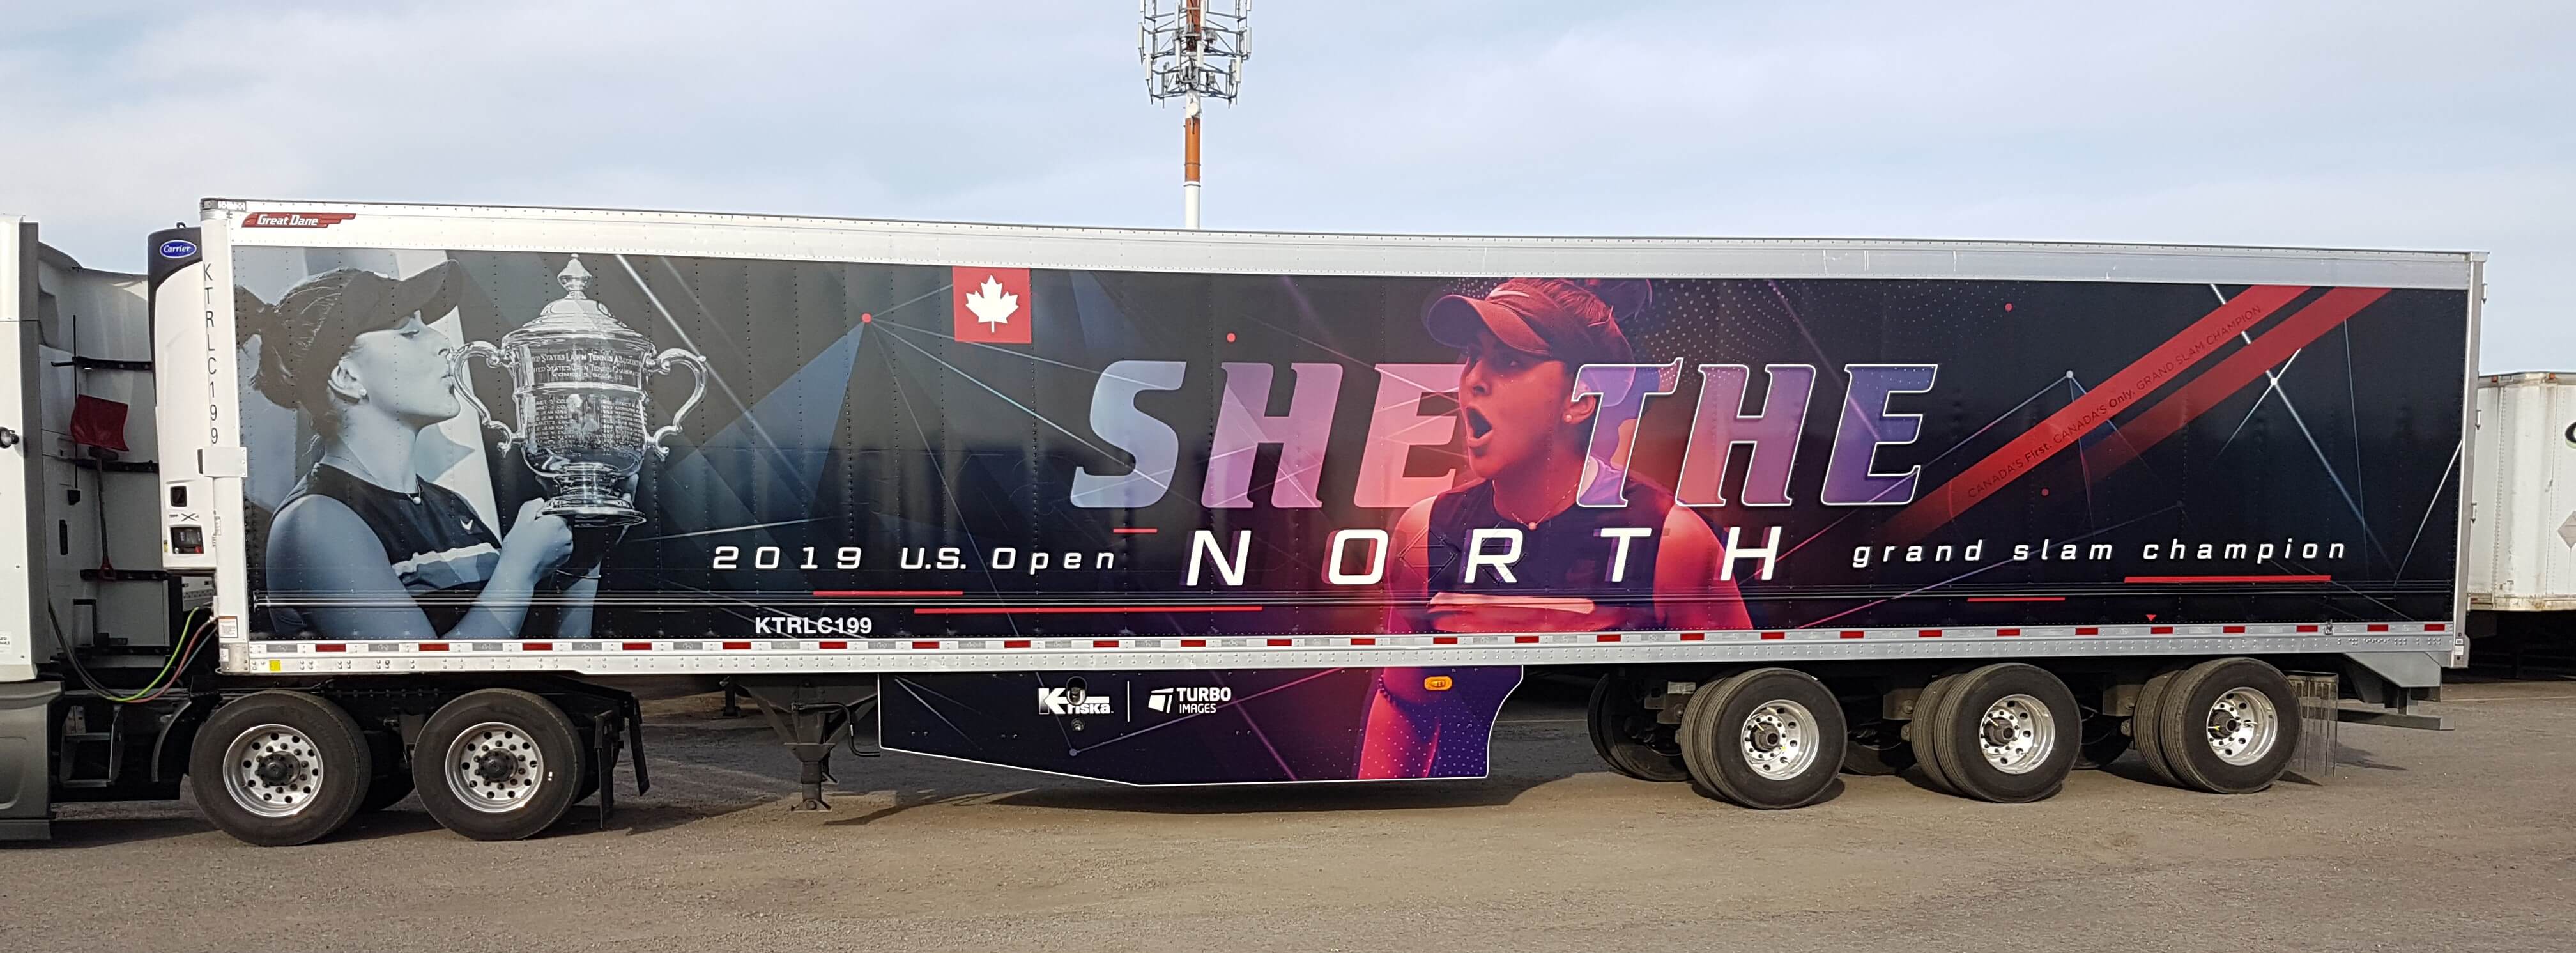 She the North truck wrap by Turbo Images 3M PMCT winner